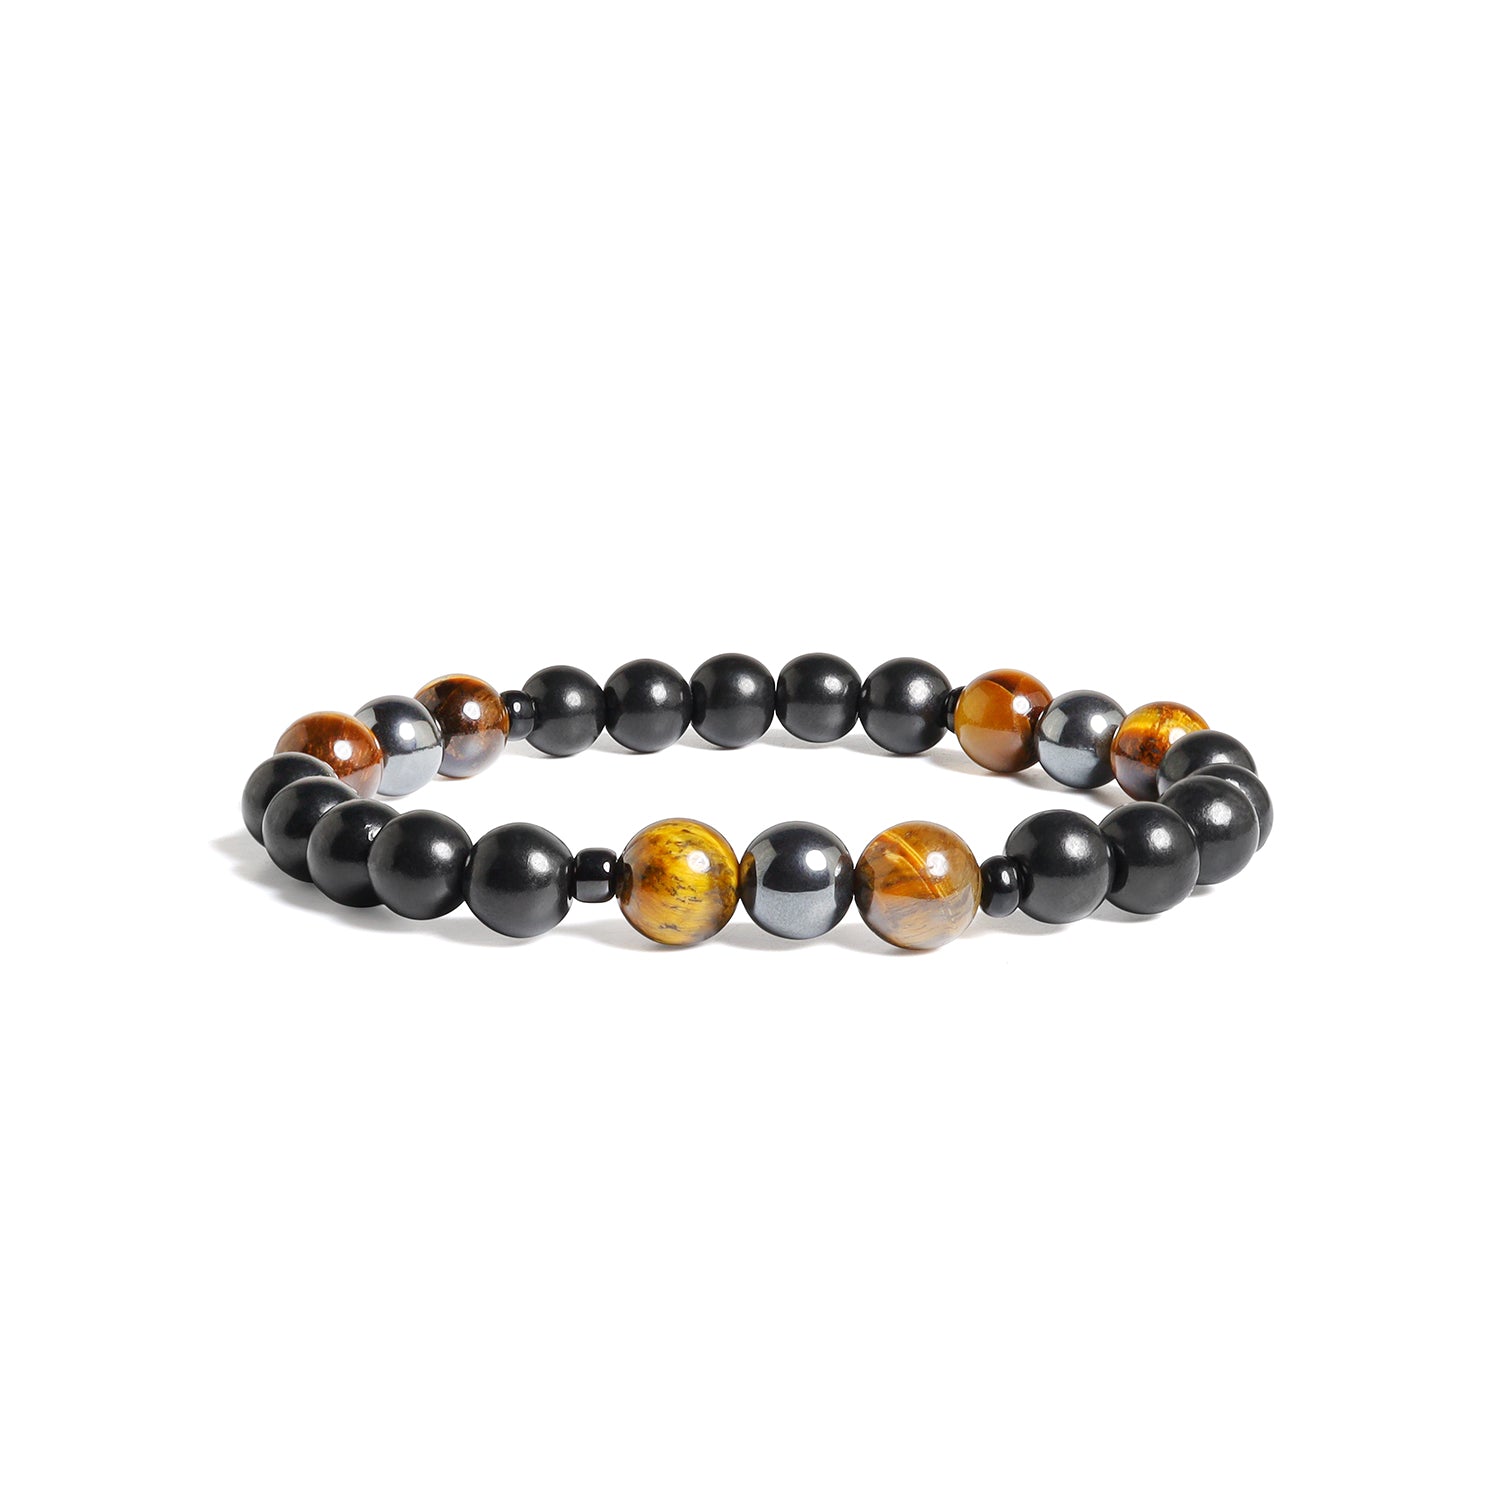 Hematite Bracelet For Concentration & Focus (Certified) - Crystals Store